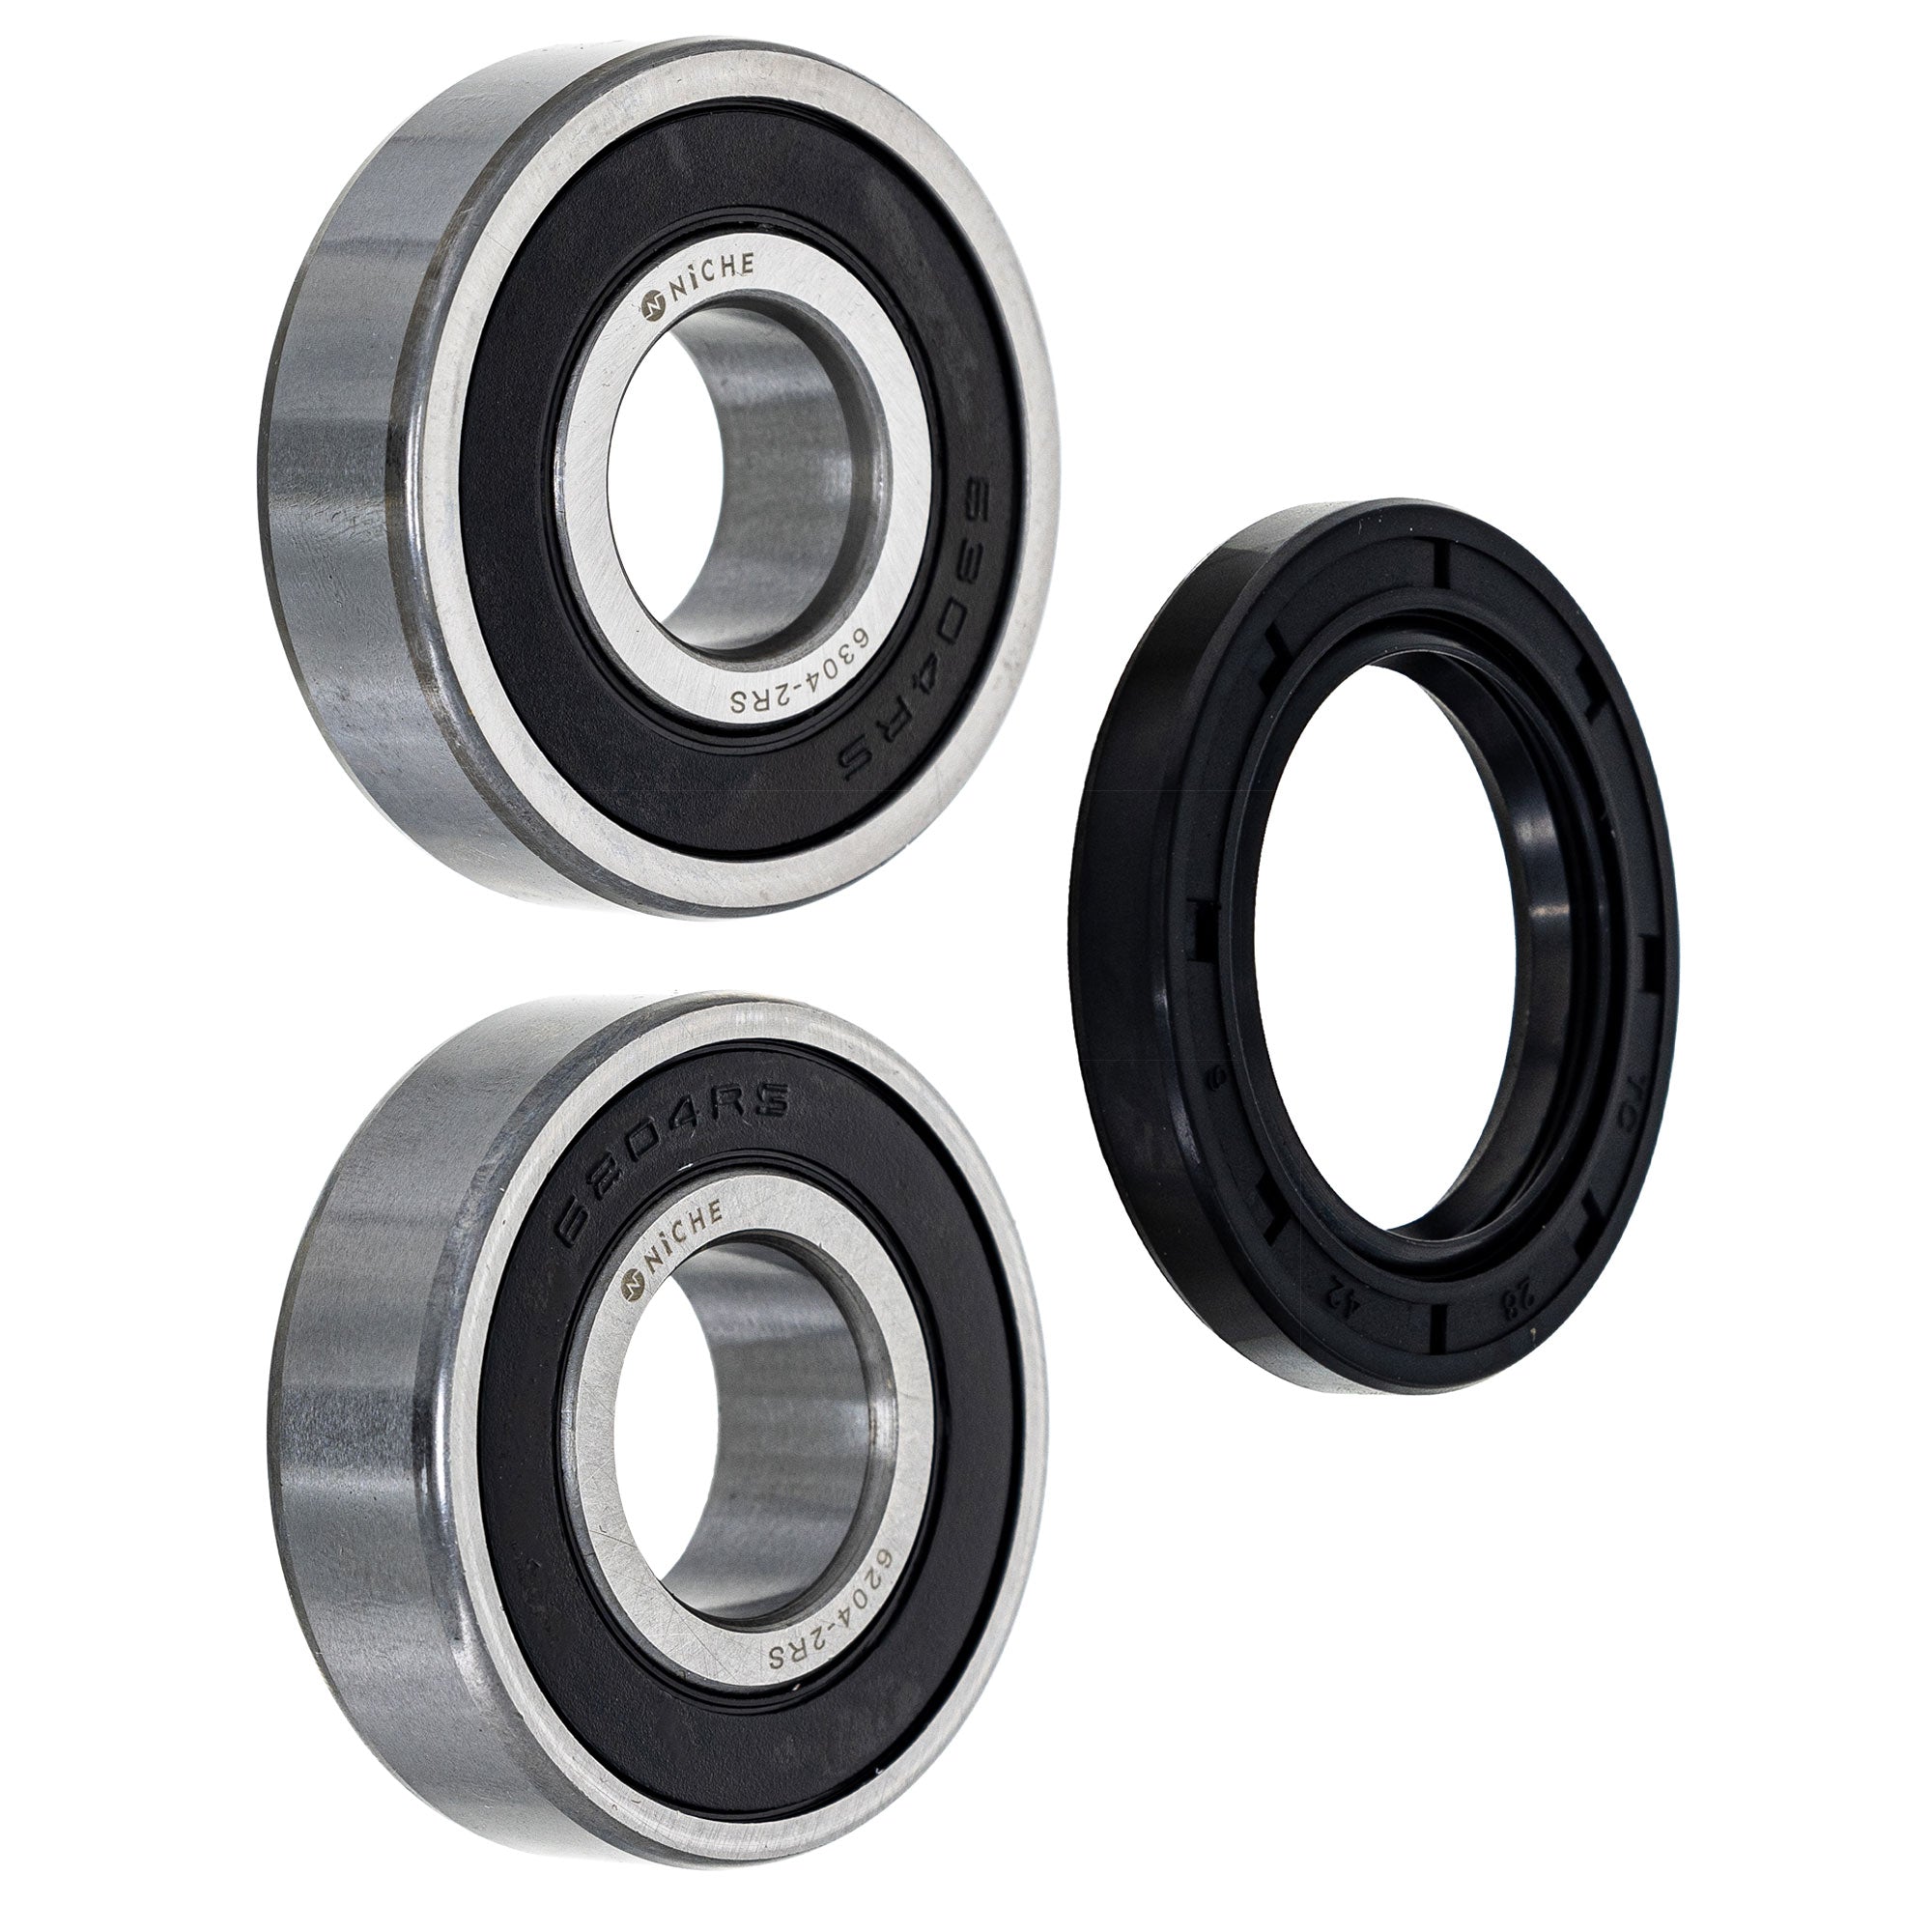 Wheel Bearing Seal Kit for zOTHER Ref No Pacific Elsinore NICHE MK1008979